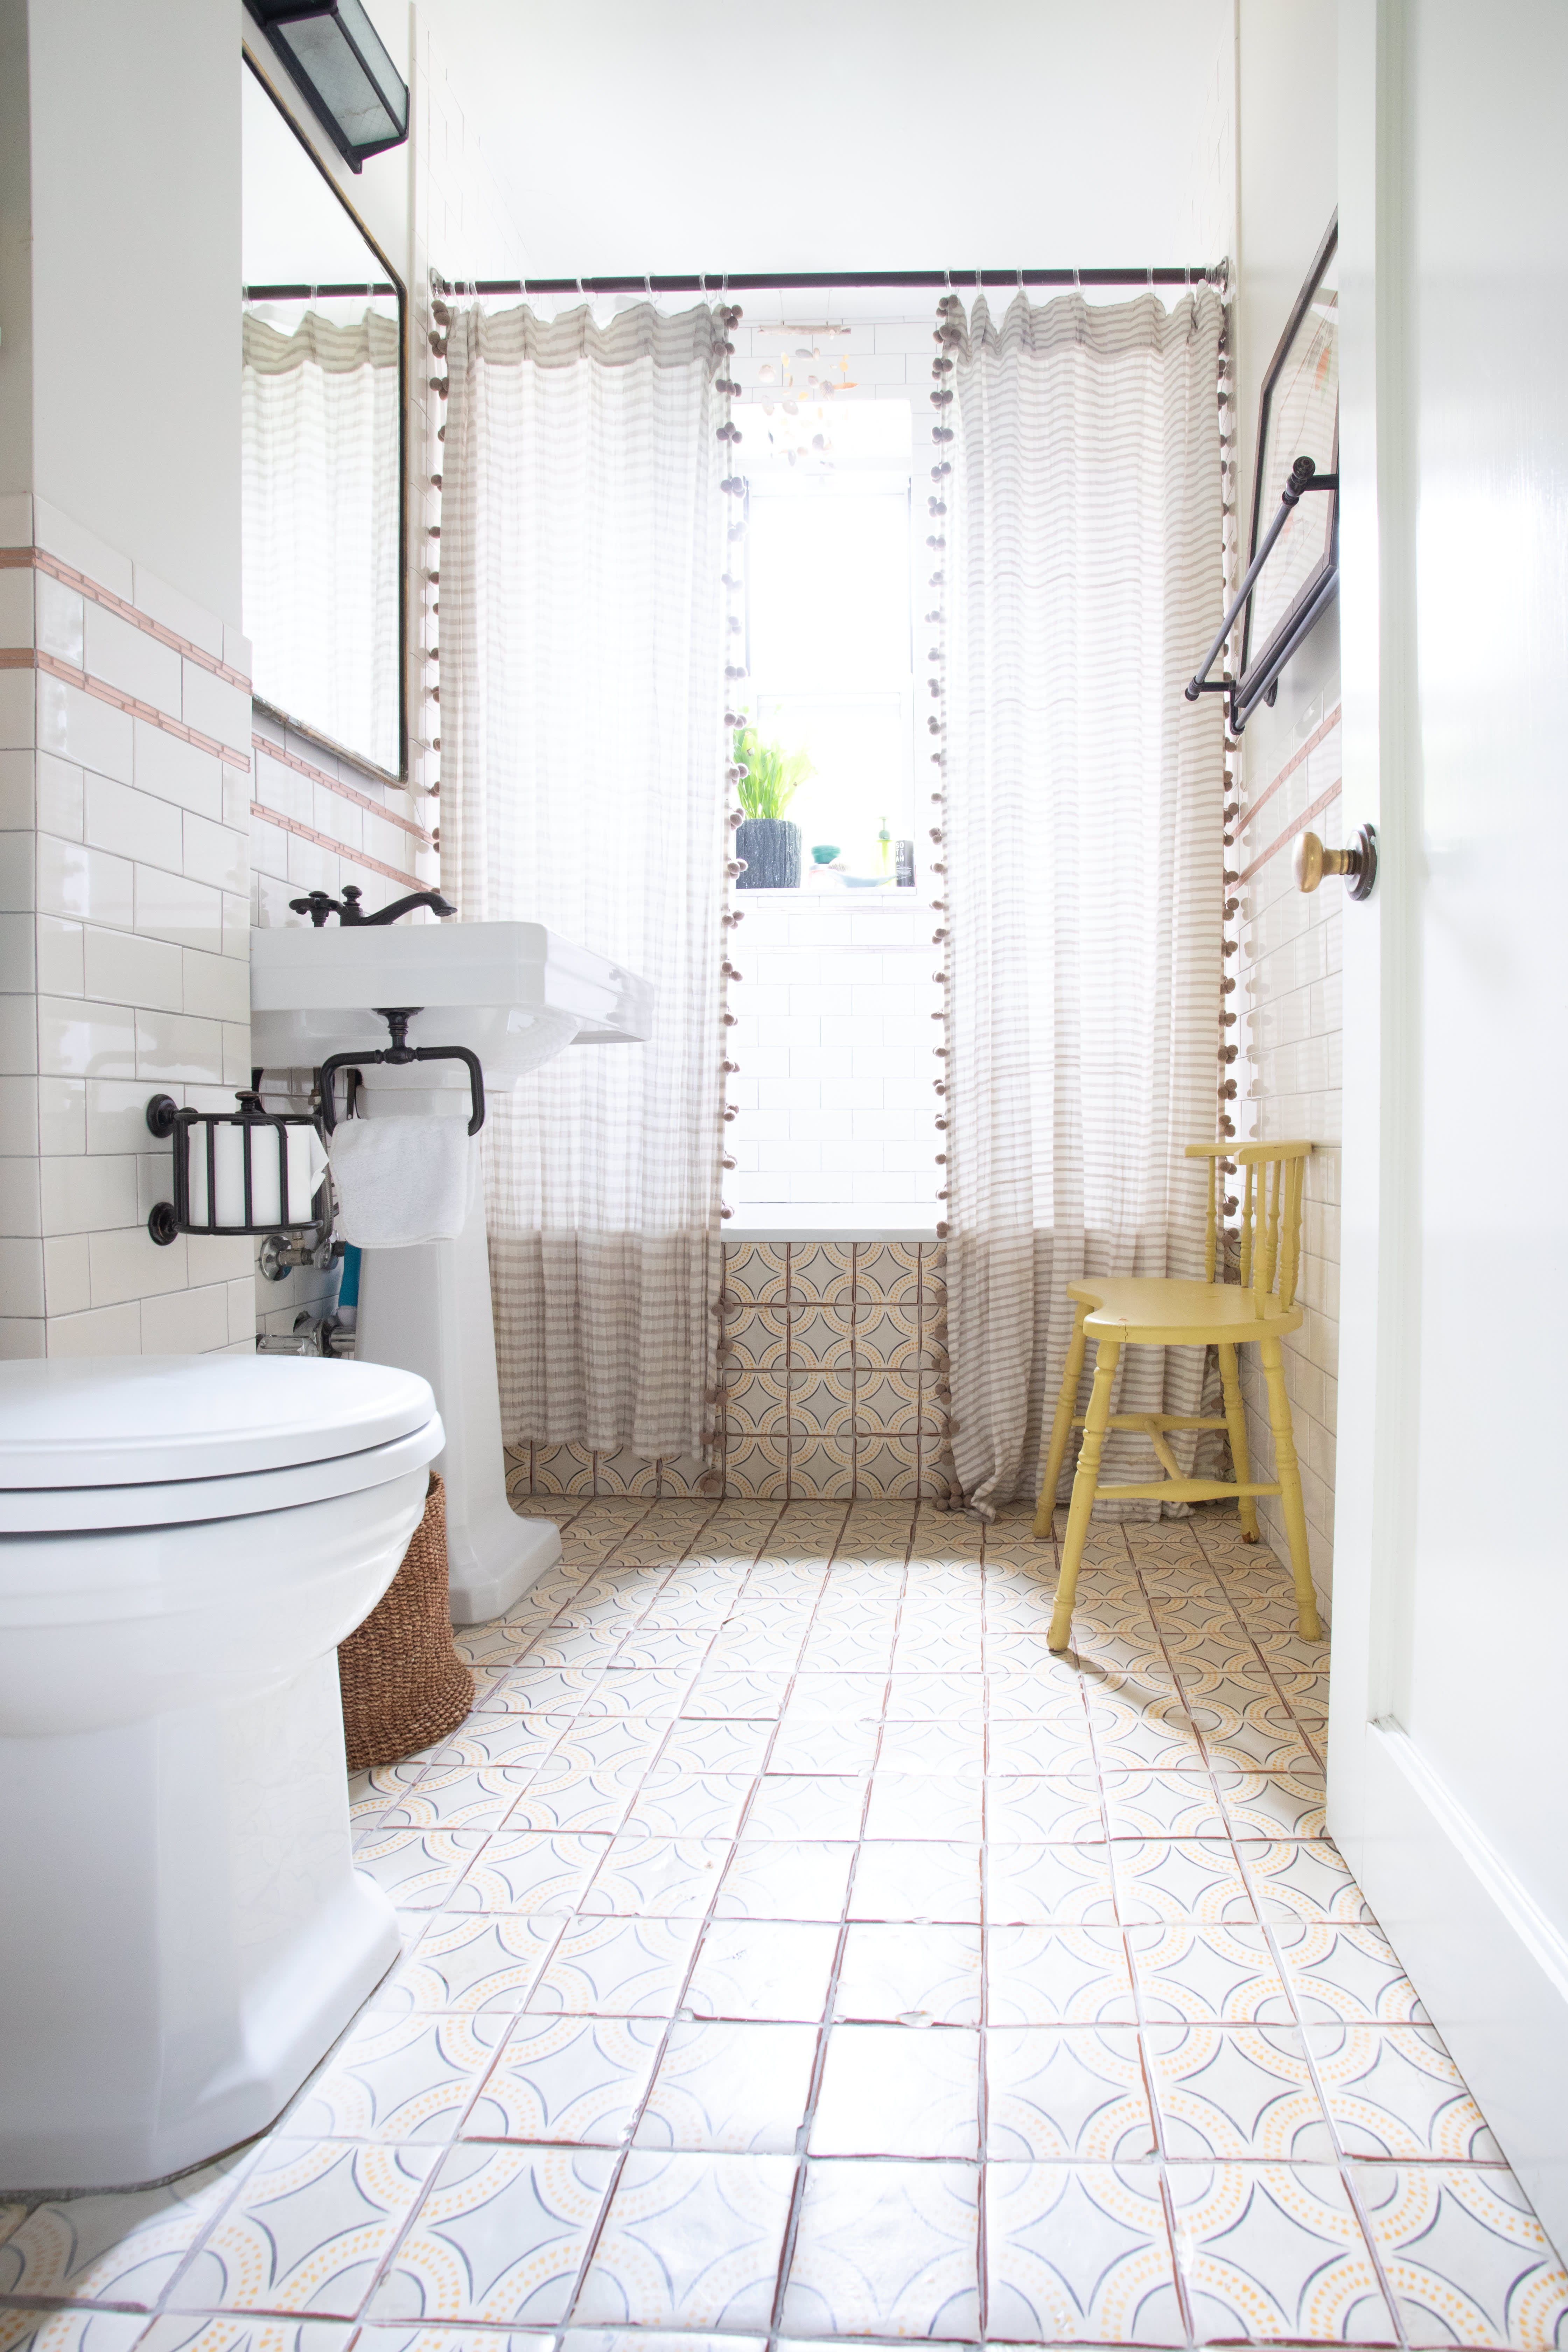 11 Unique Shower Curtain Ideas for Every Bathroom